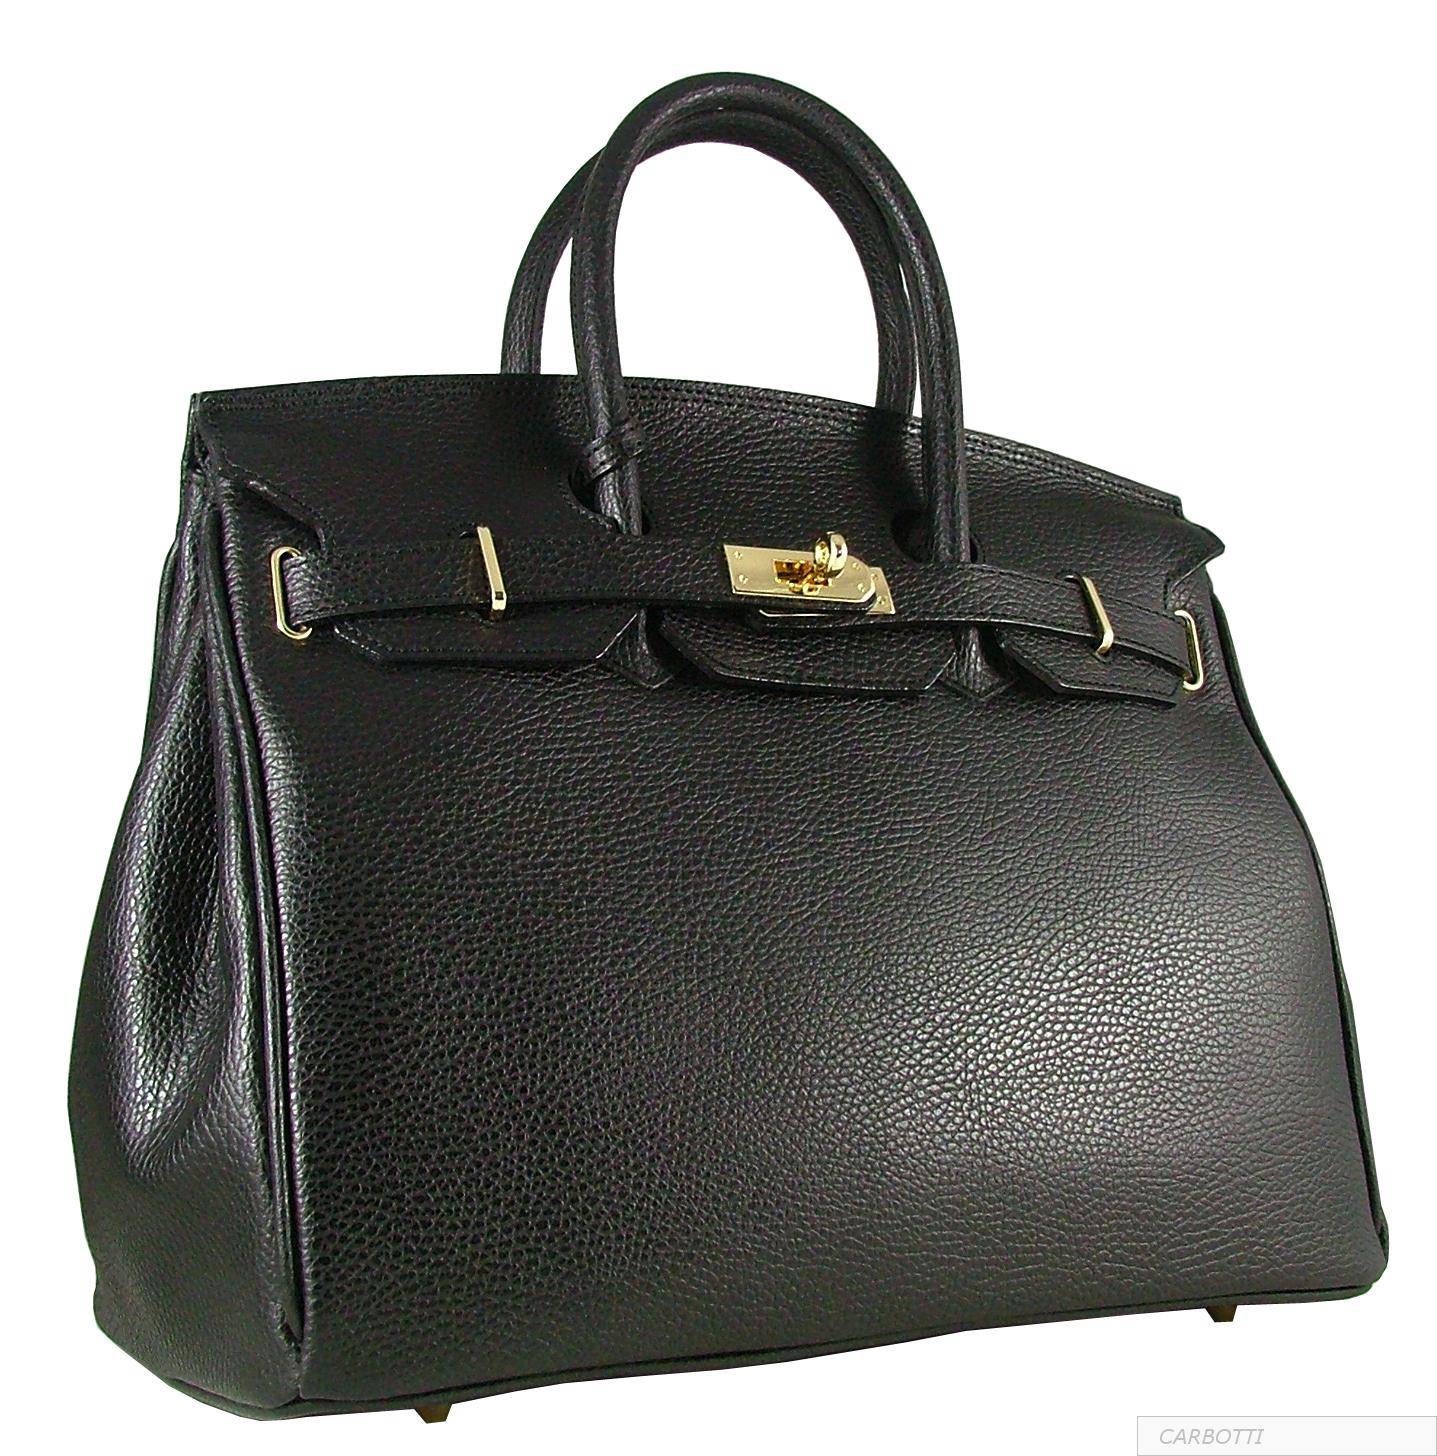 Made in Italy handbags wholesale: Italian manufacturers brands of leather bags